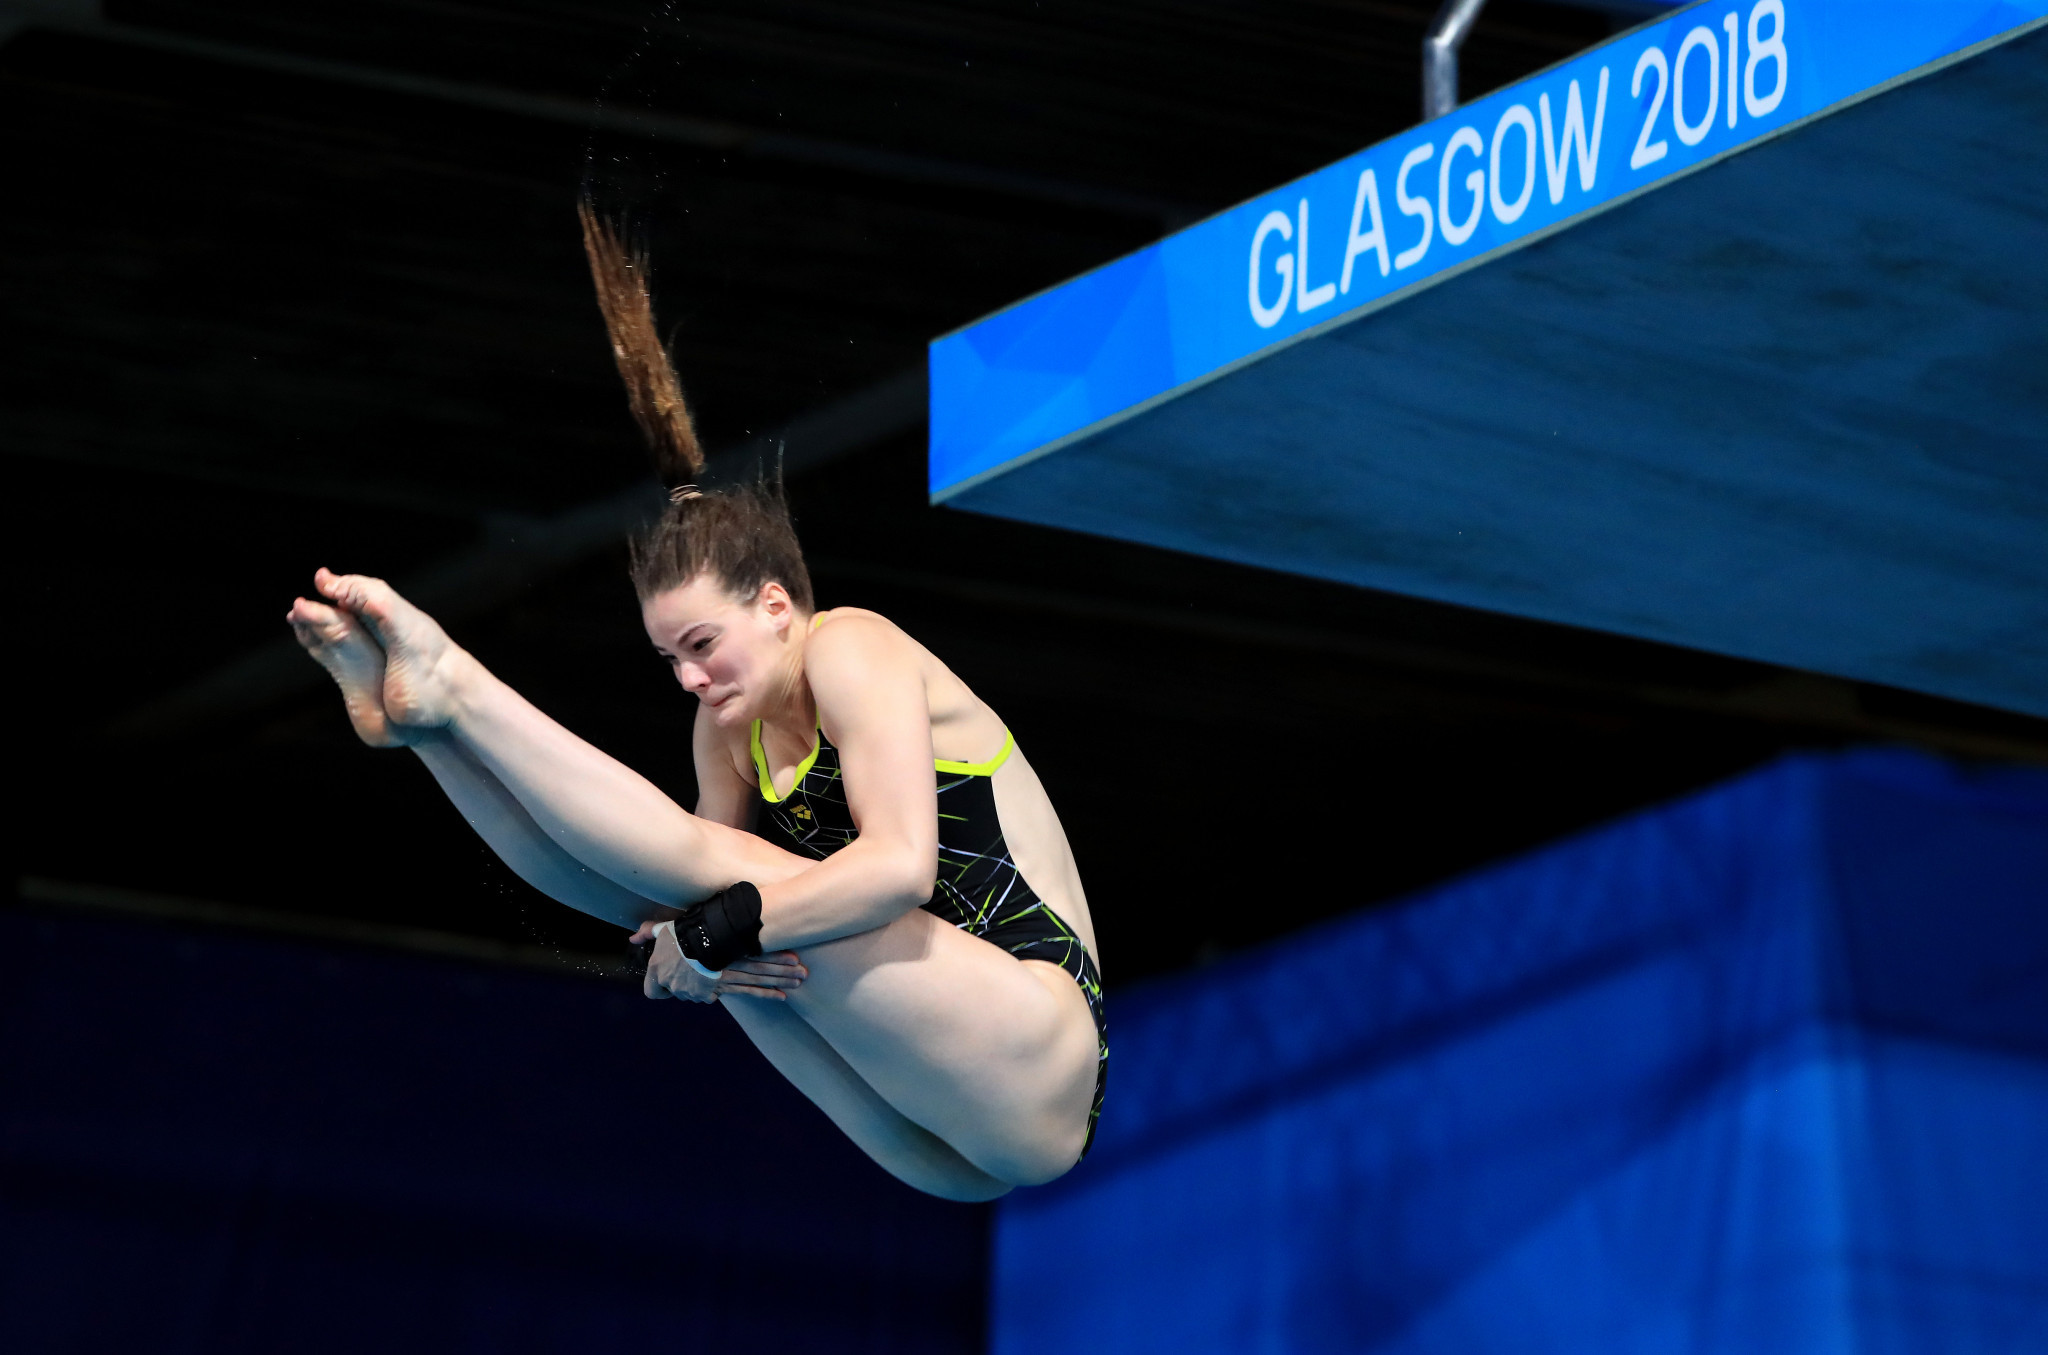 Elena Wassen earned a bronze medal at the Glasgow 2018 European Championships ©Getty Images